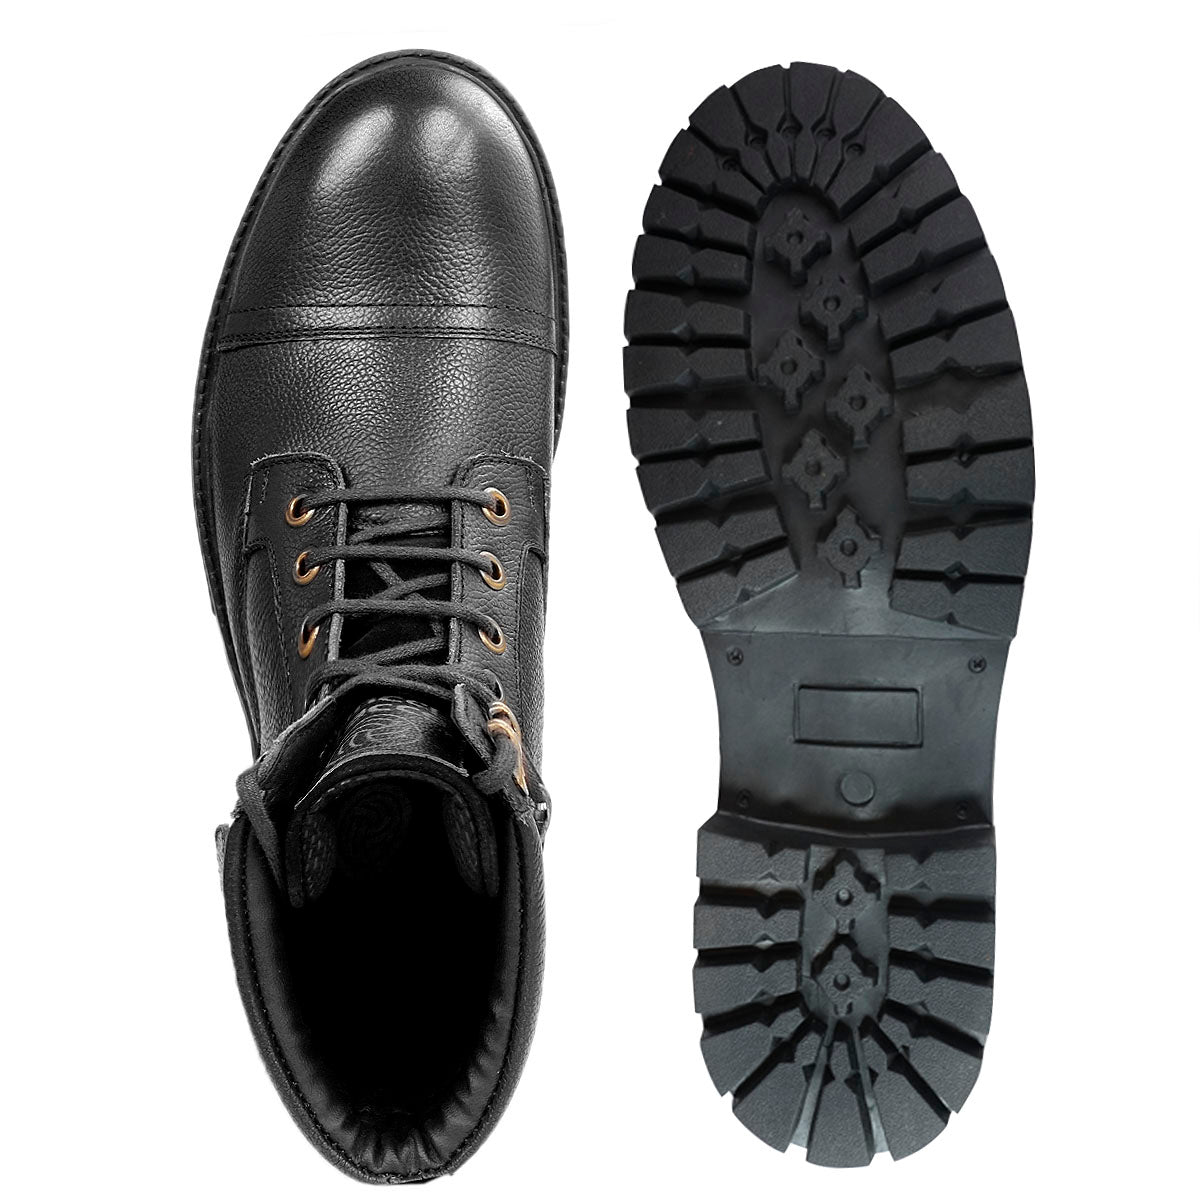 Bacca Bucci Street Fighter Leather Chukka Derby Boots | Leather Boots for Men